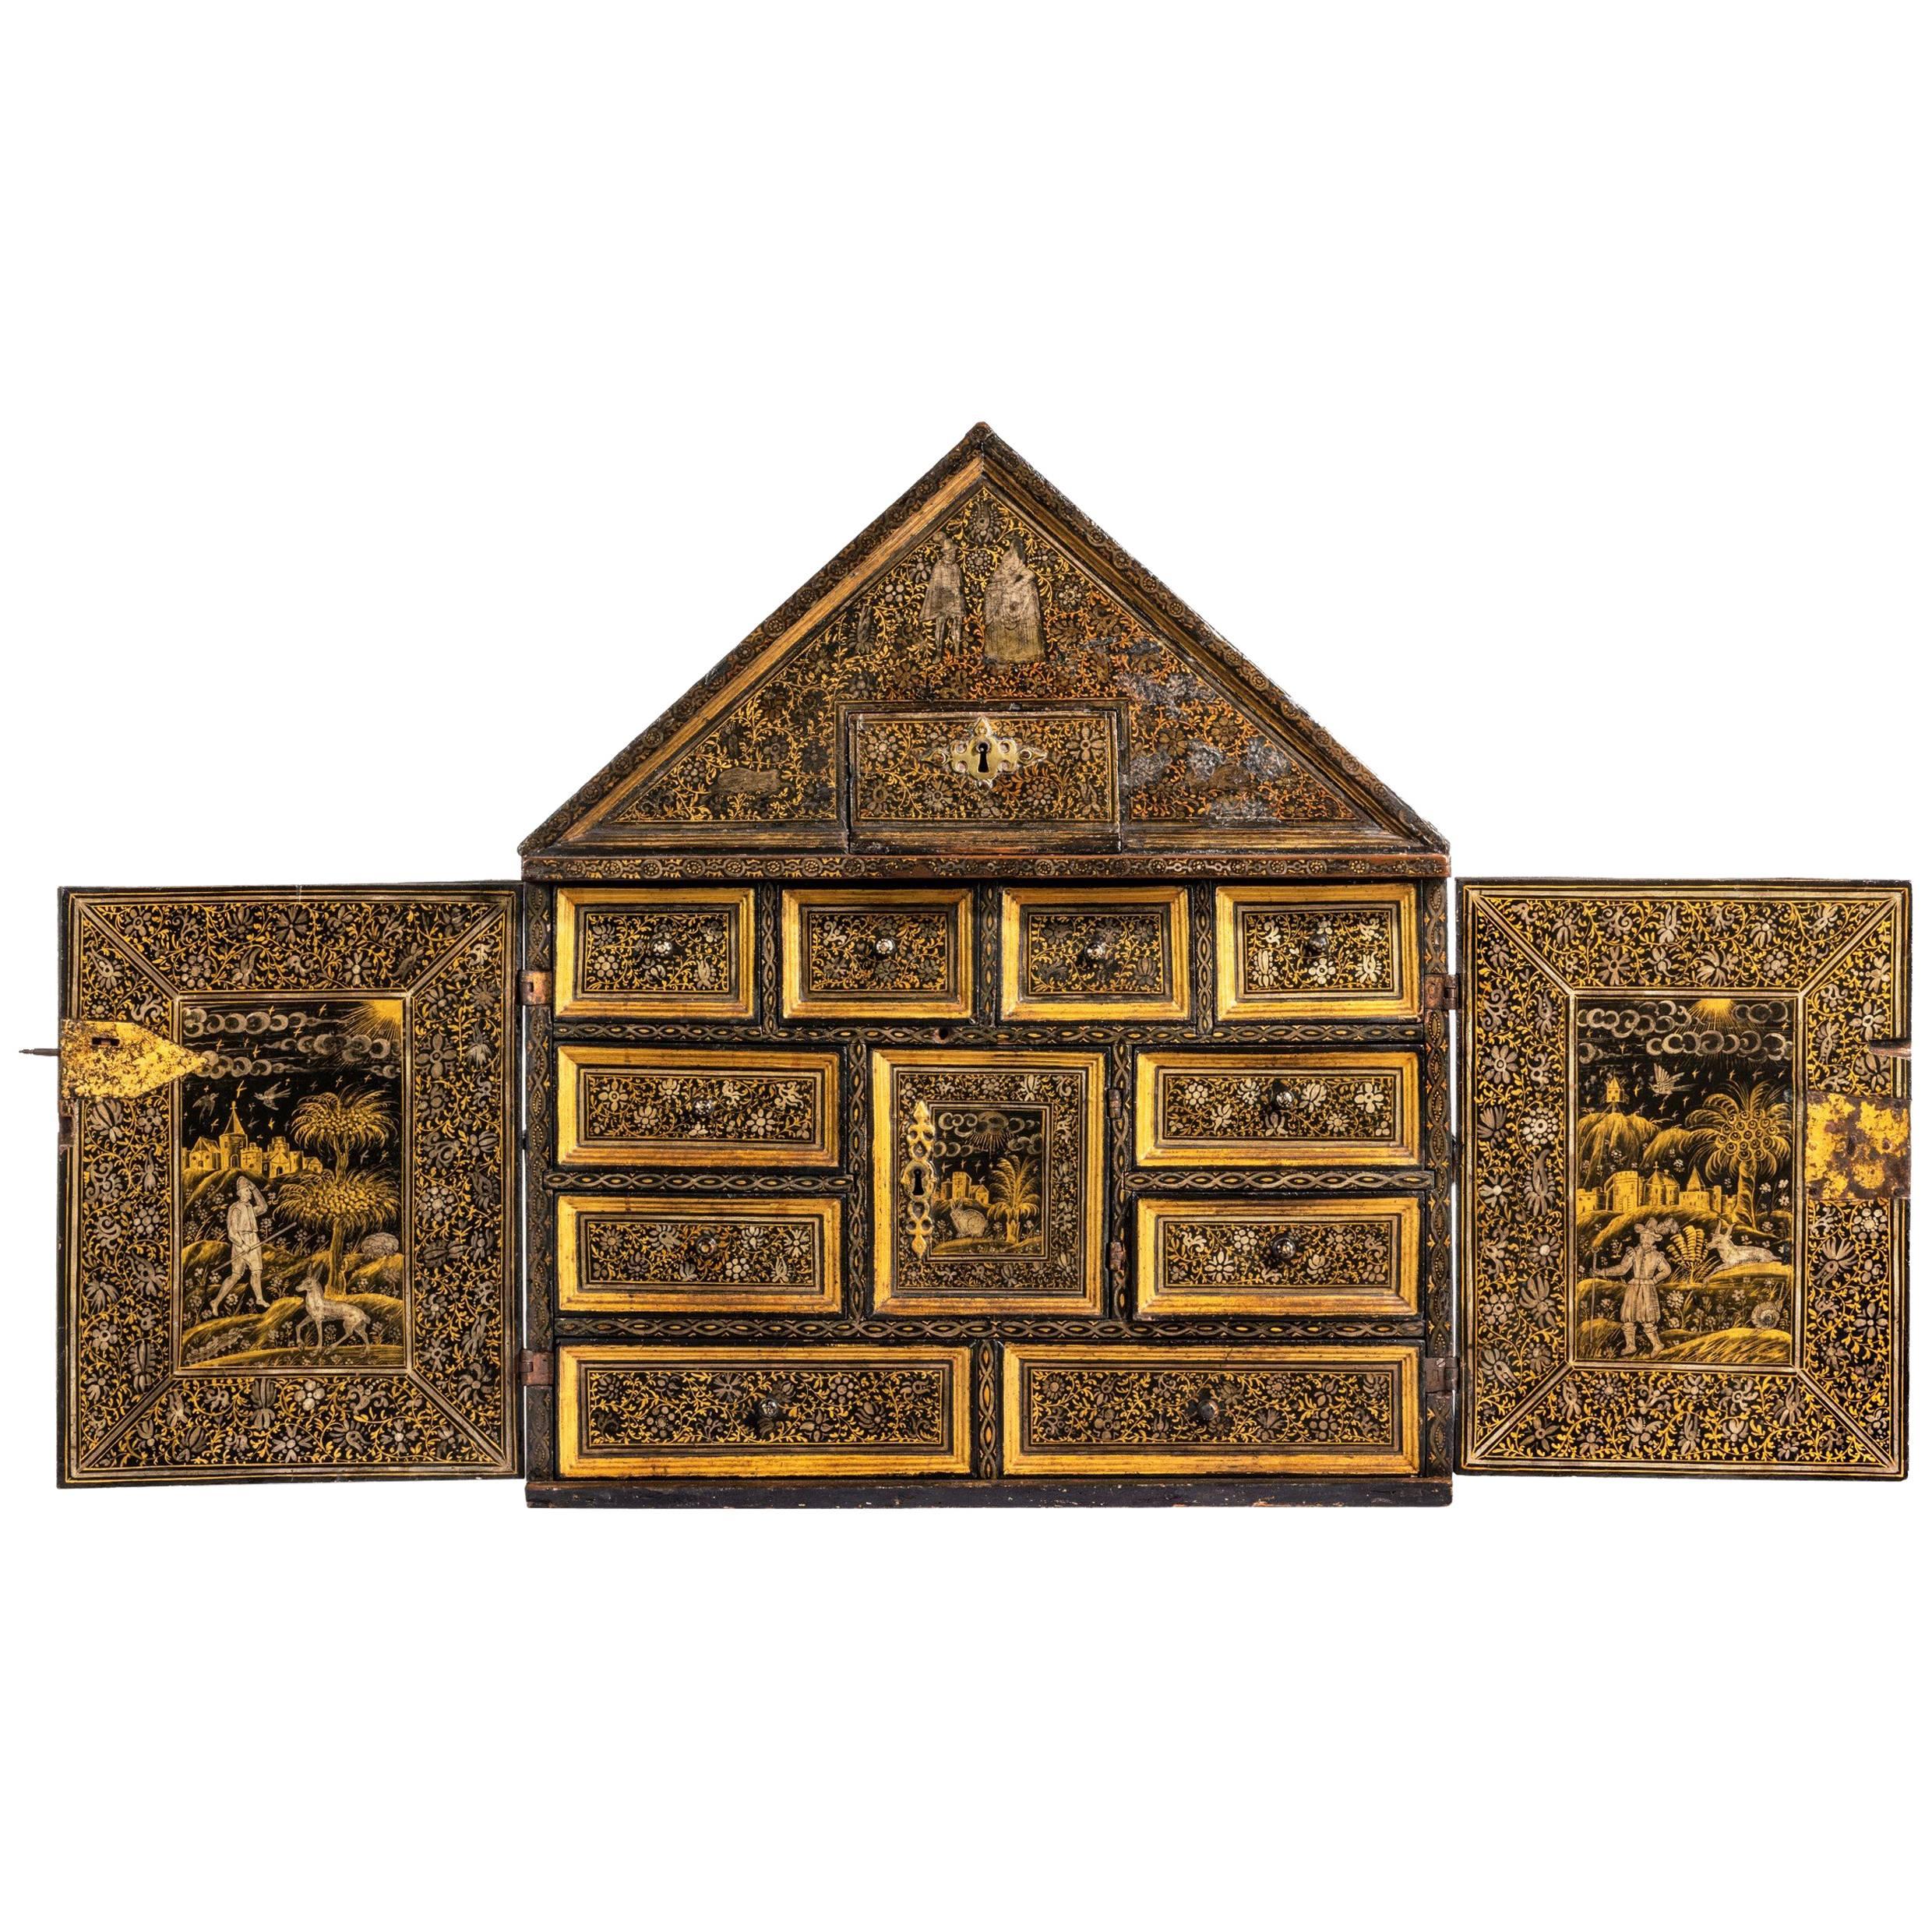 Extremely Rare Museum Quality English Table Cabinet, circa 1620